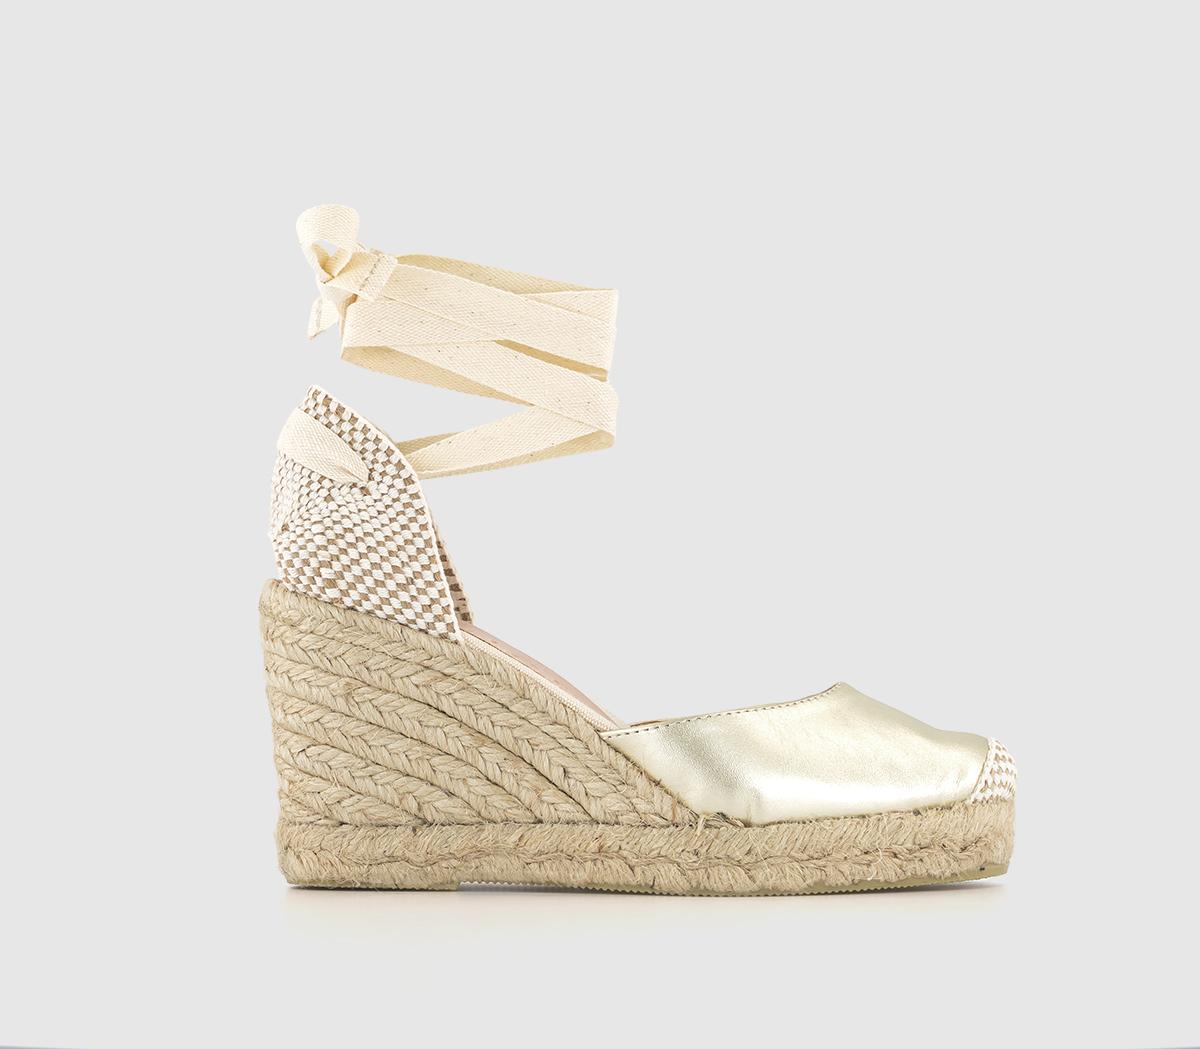 OFFICEMarmalade Espadrille WedgesGold Leather